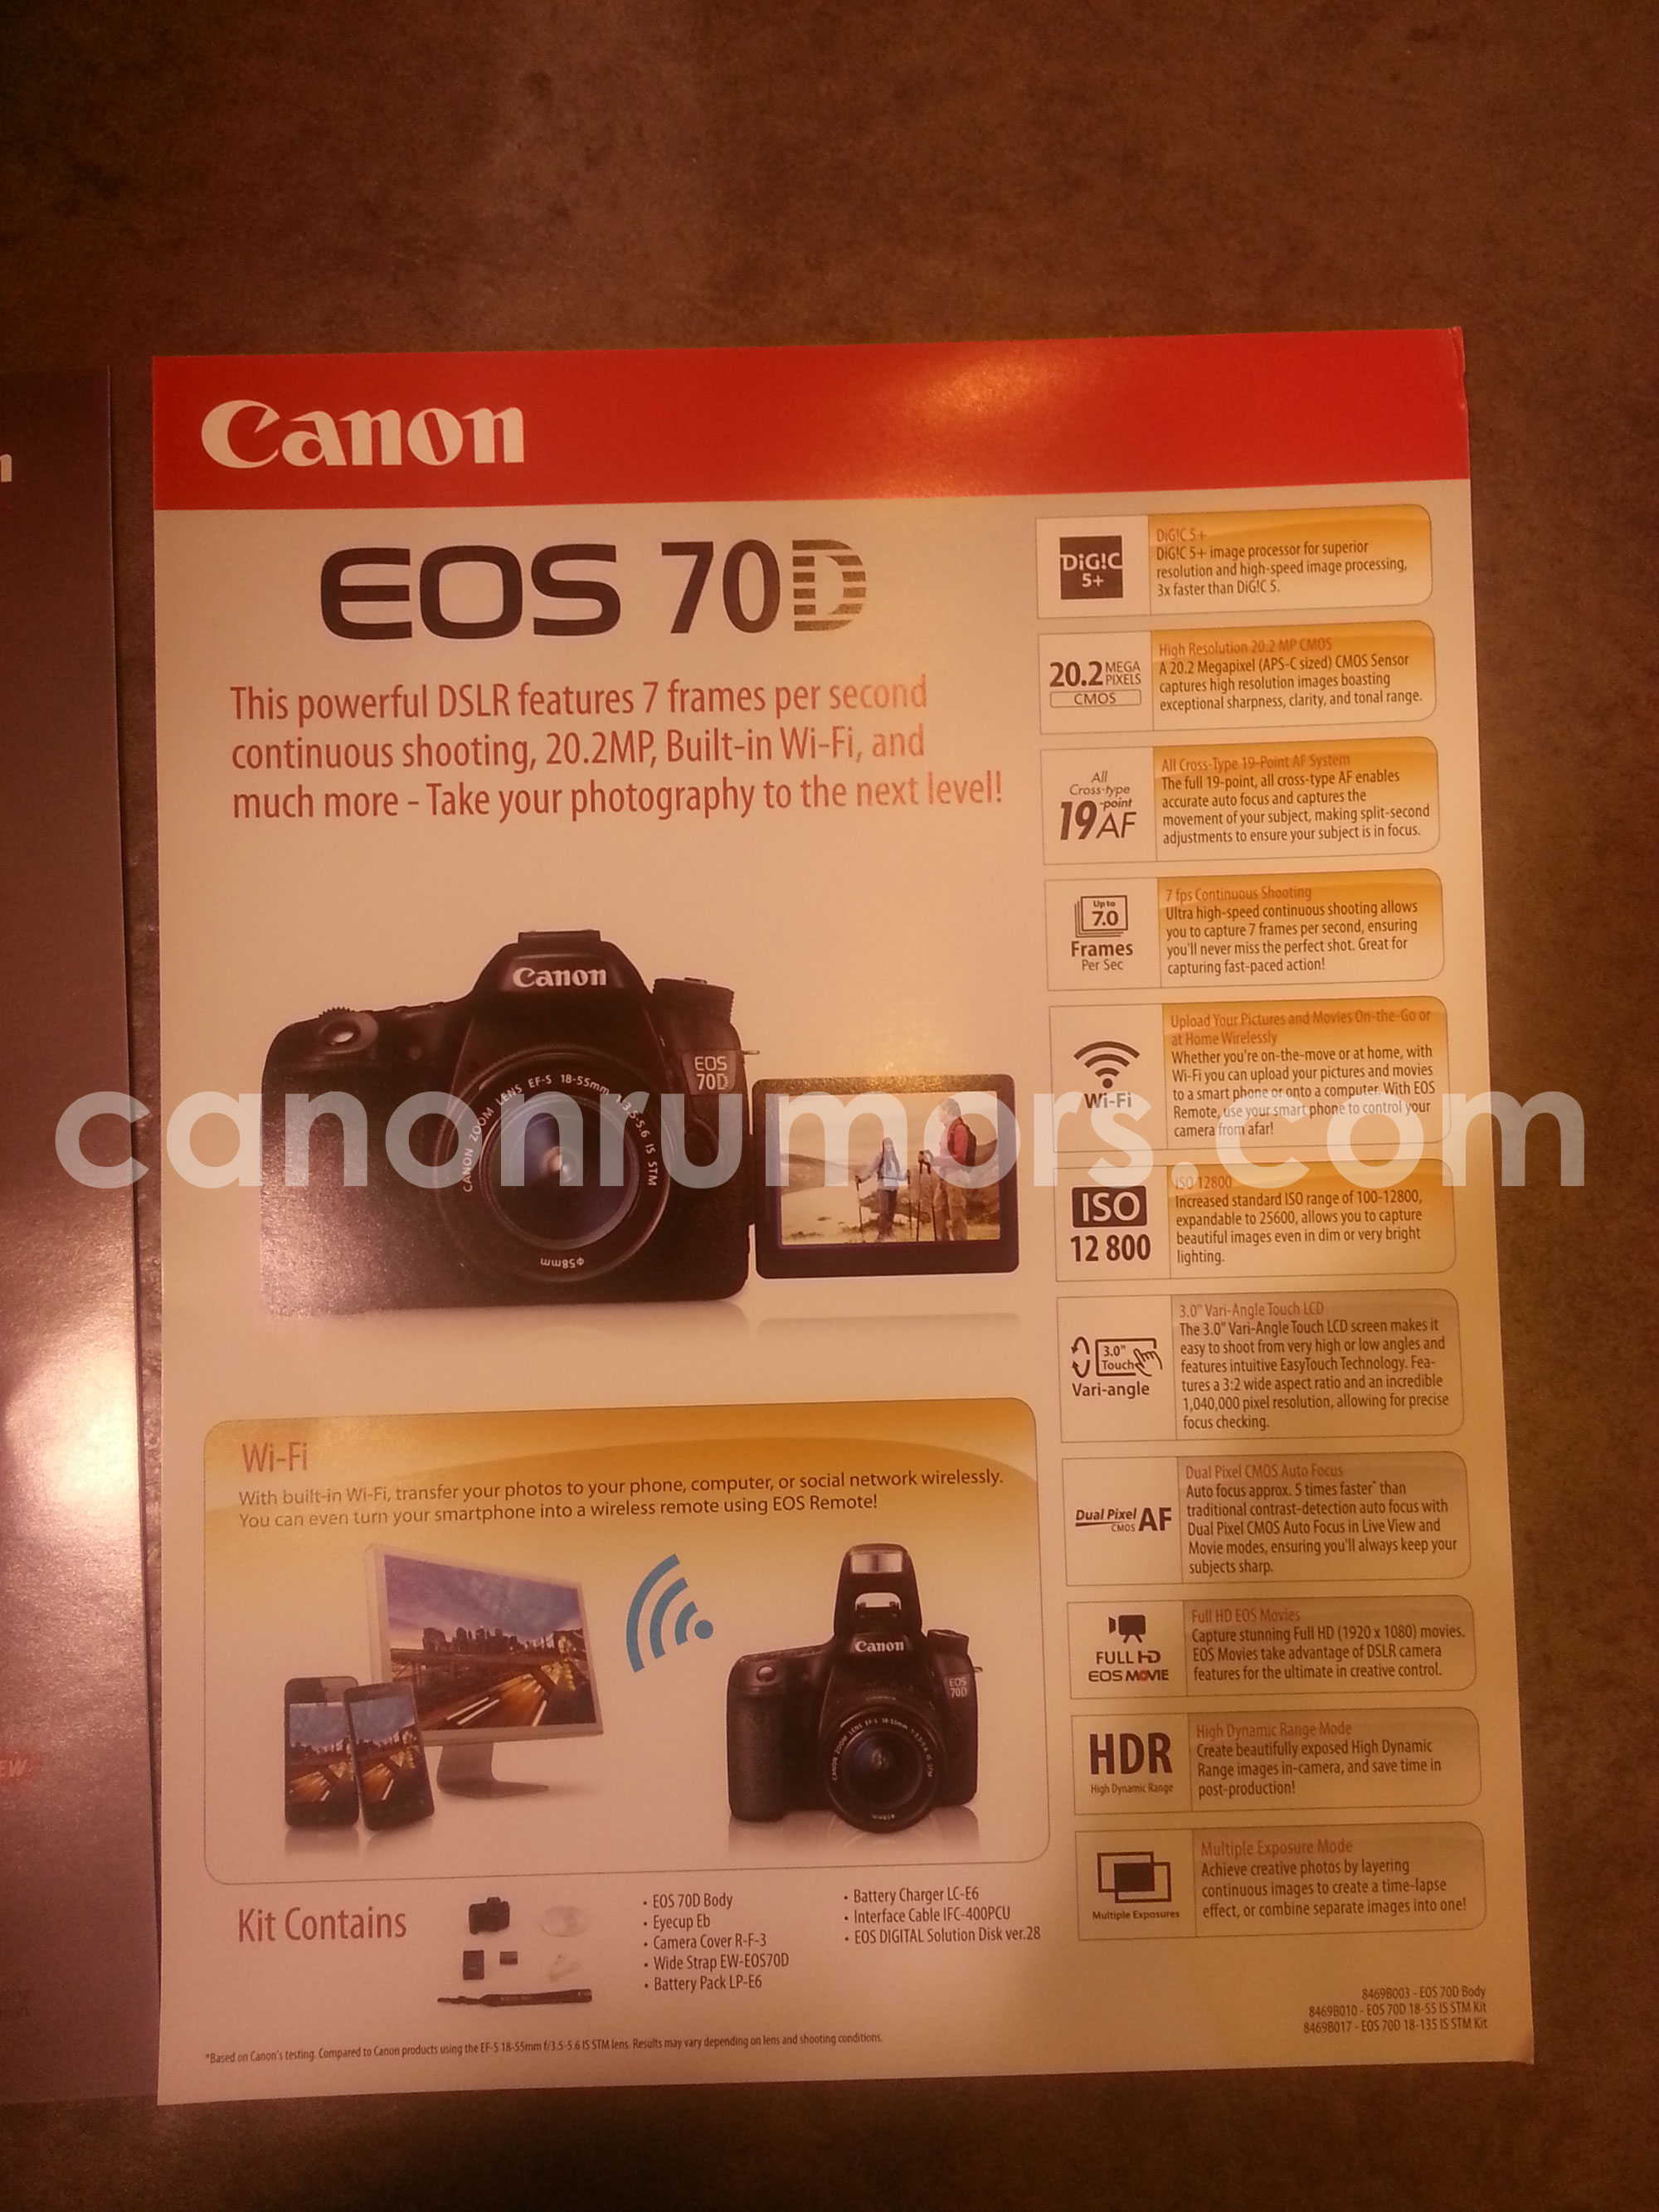 throne transaction passionate Canon EOS 70D Specs (New Sensor), to be announced on July 2 ! – Camera News  at Cameraegg